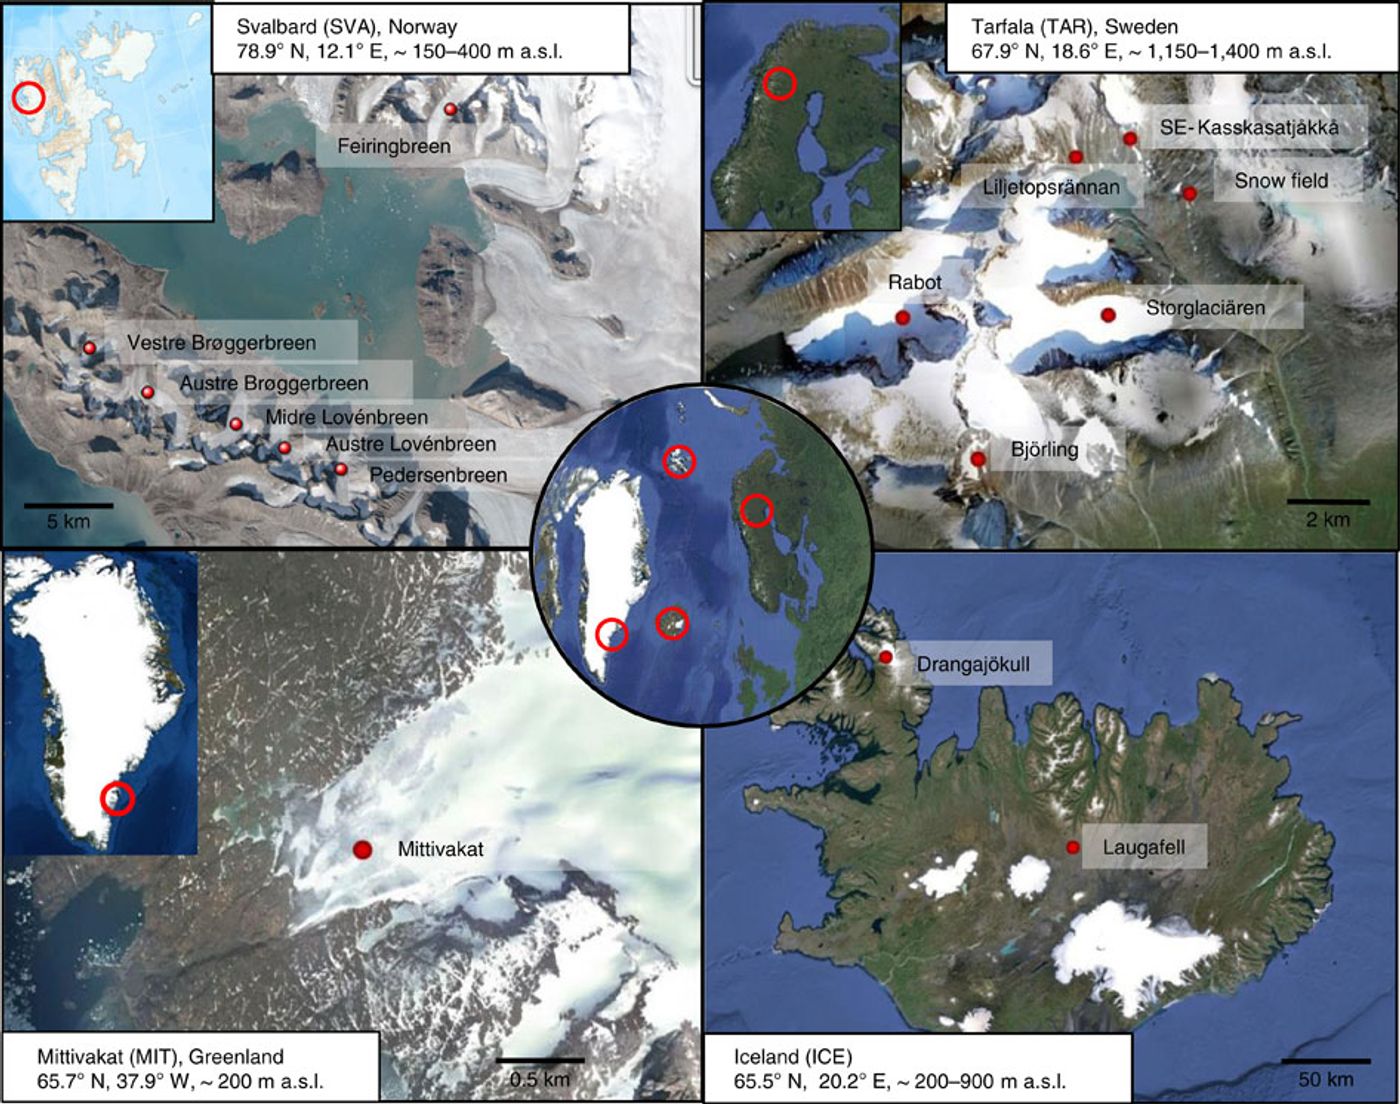 Sample locations used in the study are pictured in this image from Nature Communications